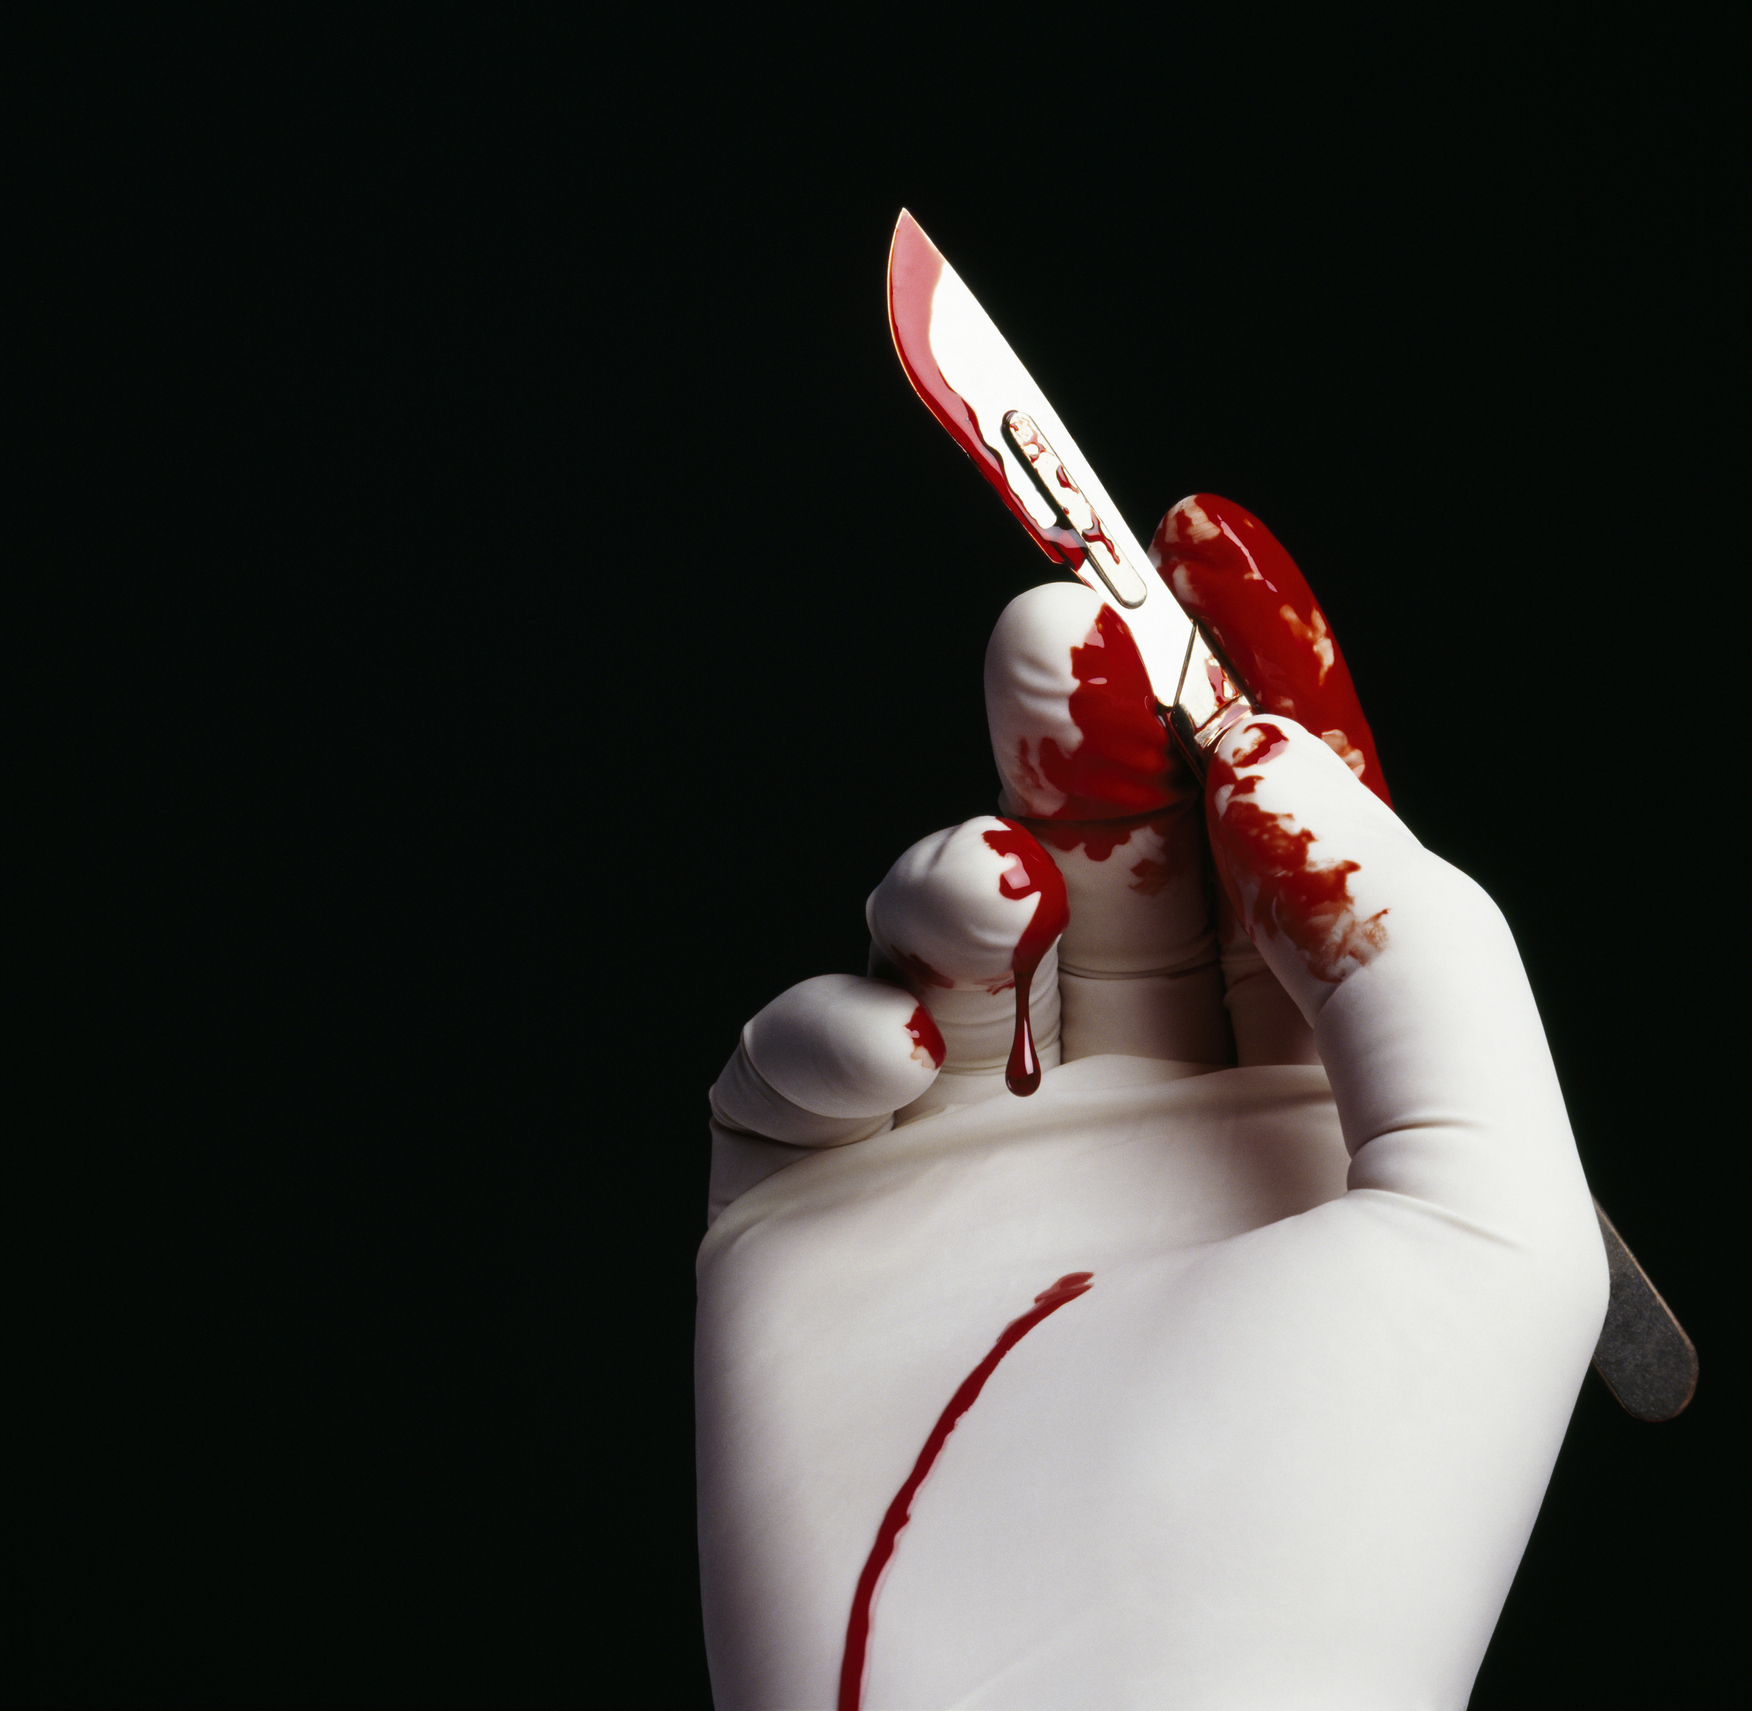 Surgeon holding blood stained scalpel, close-up of hand